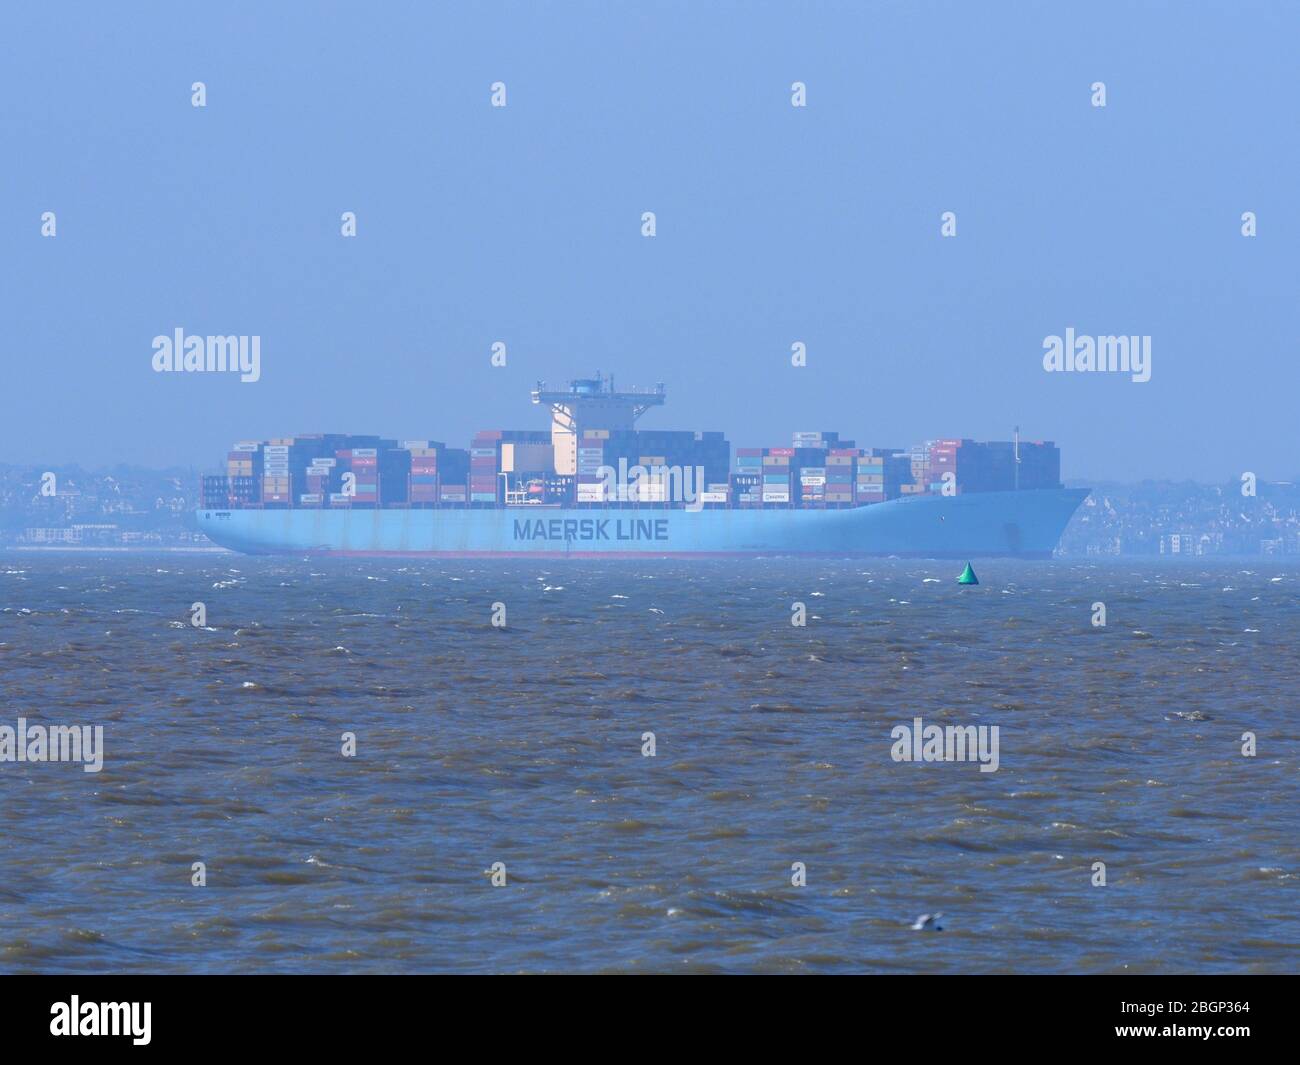 Sheerness, Kent, UK. 22nd Apr, 2020. Huge containership Emma Maersk (the largest containership in the world when launched in 2006) departs the Thames today. The Port of London reported yesterday that last week (13 April to 19 April), there wre 287 ship movements, 173 of which were piloted, adding 'the number of ship movements has fallen from the pre-coronavirus levels as supply chains progressively focus on essentials of food, medicine and electronic goods needed to help people work and stay in touch'. Credit: James Bell/Alamy Live News Stock Photo